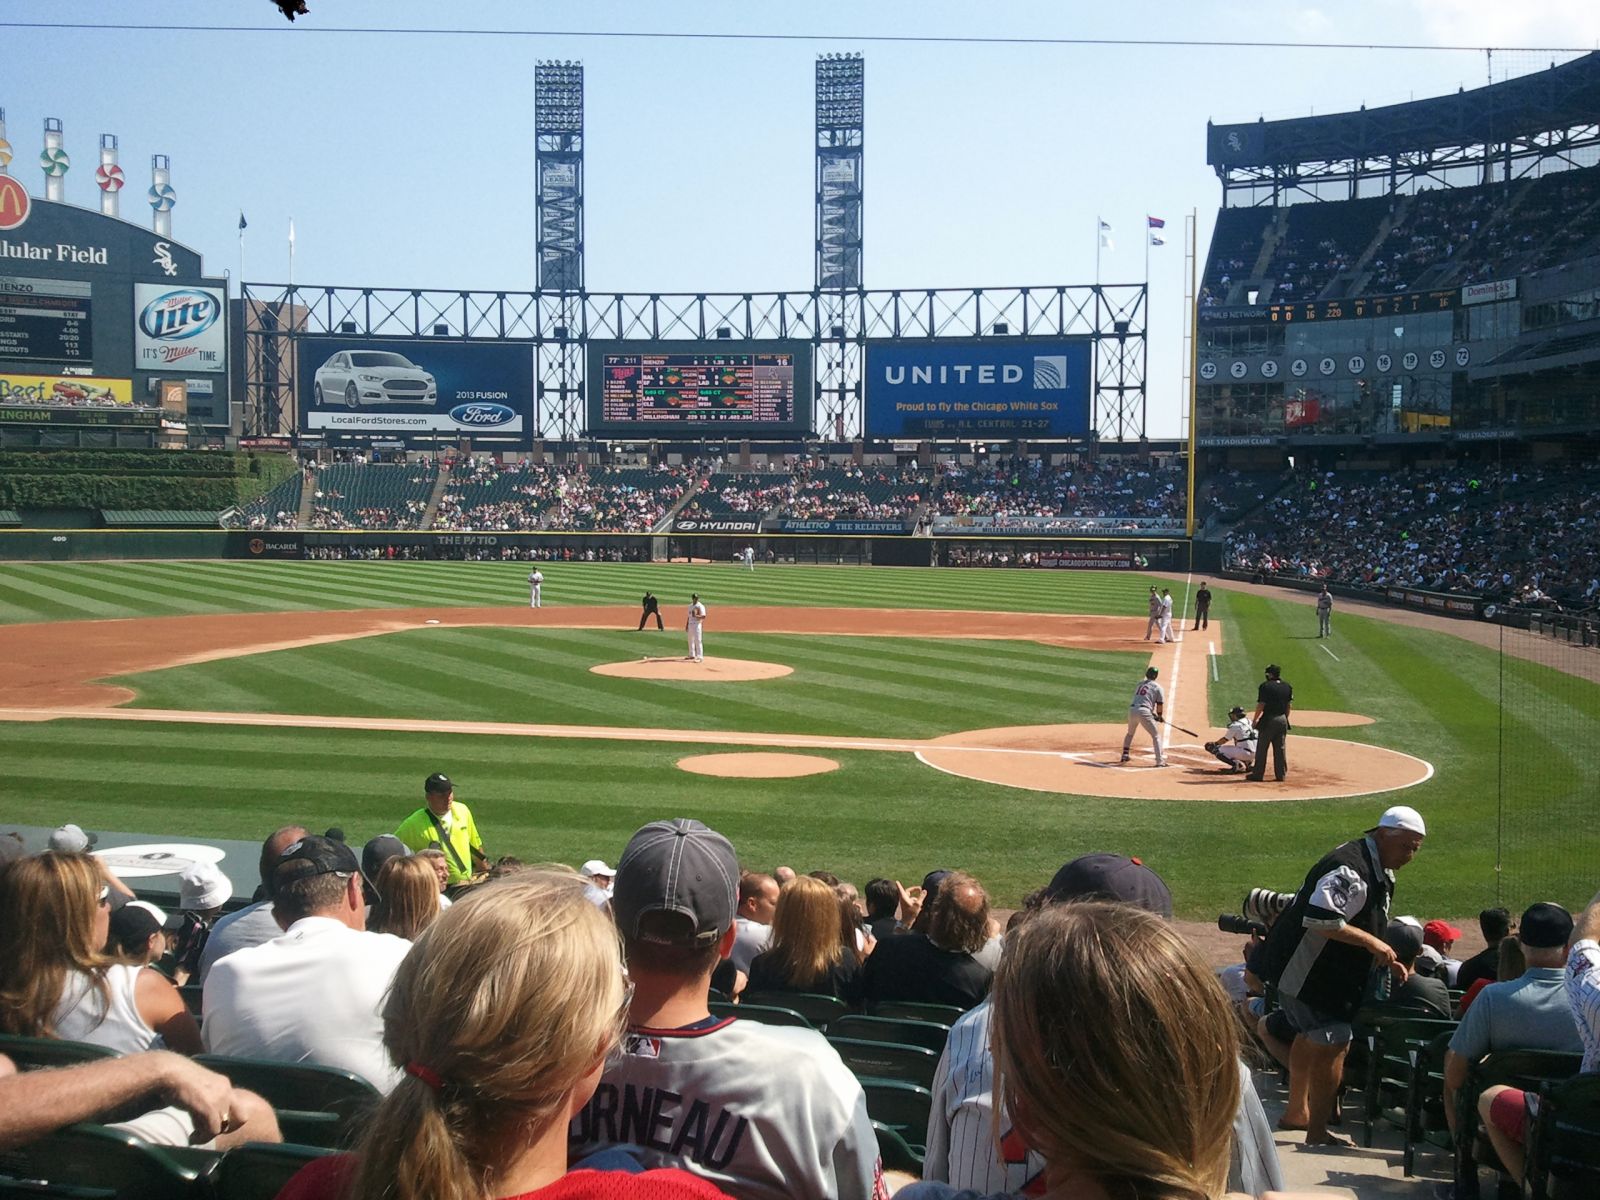 section 136, row 18 seat view  - guaranteed rate field